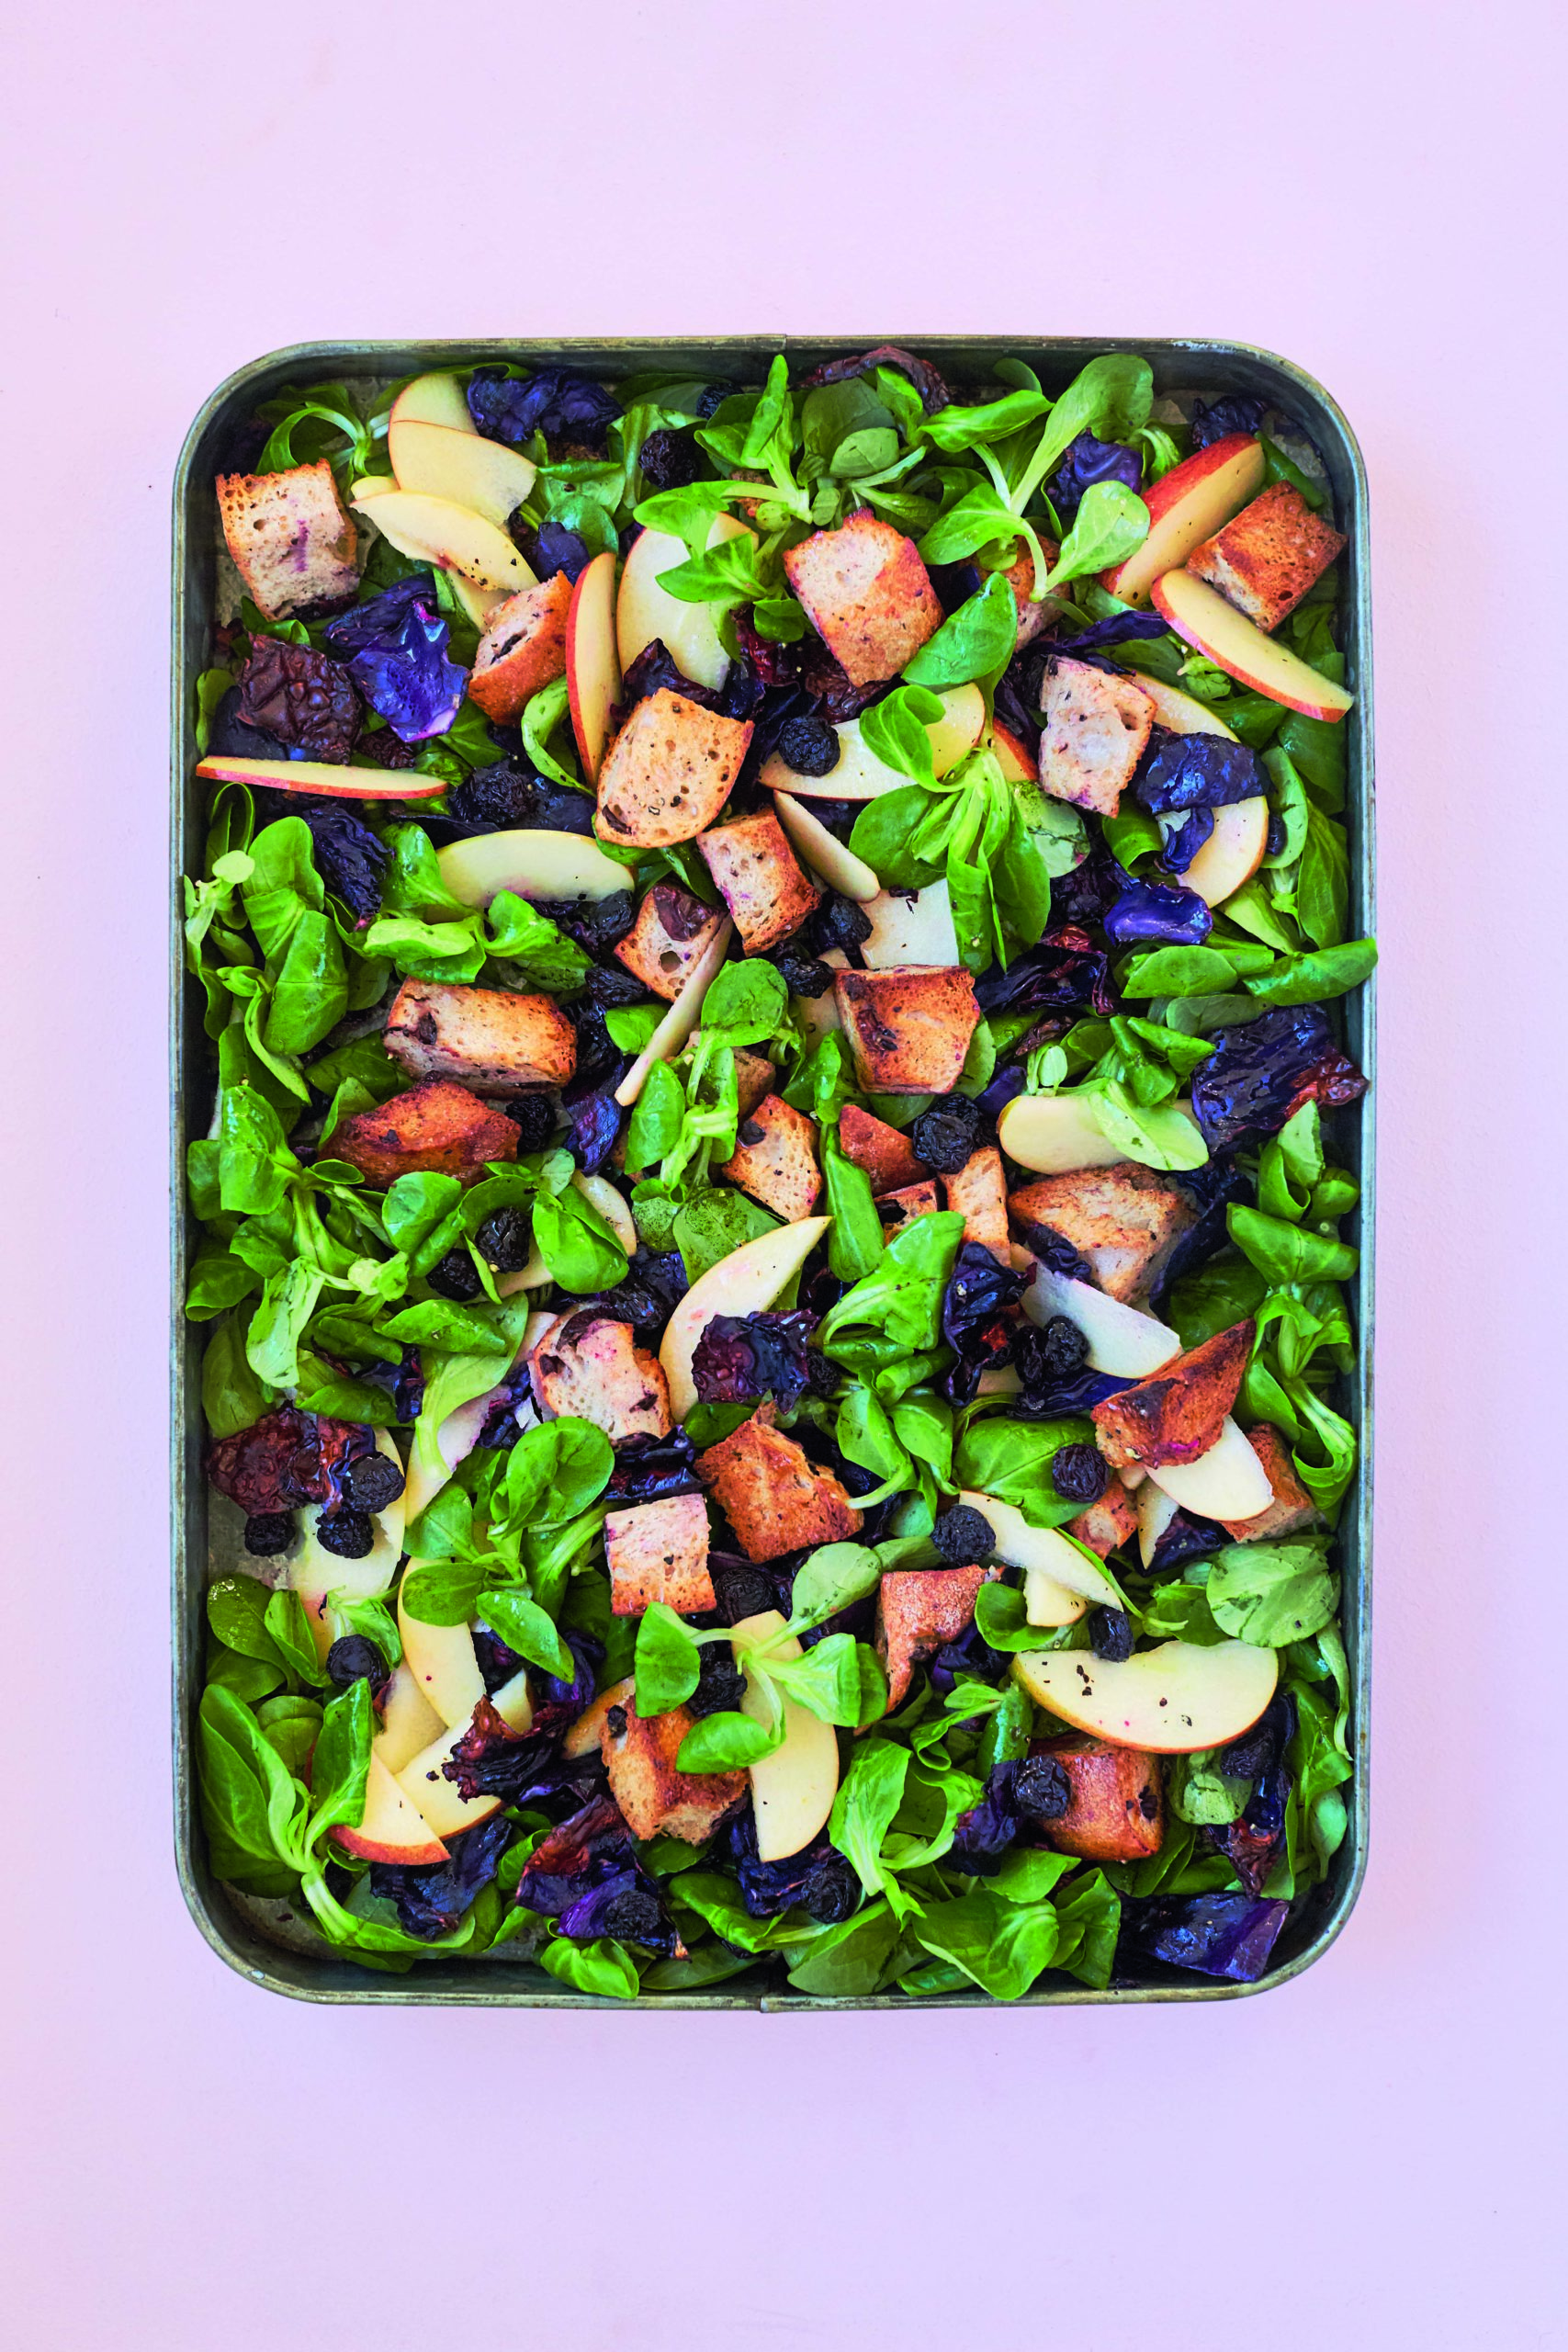 Roasted Red Cabbage With Crisp Garlic Croutons, Apple, Raisins and Lamb’s Lettuce